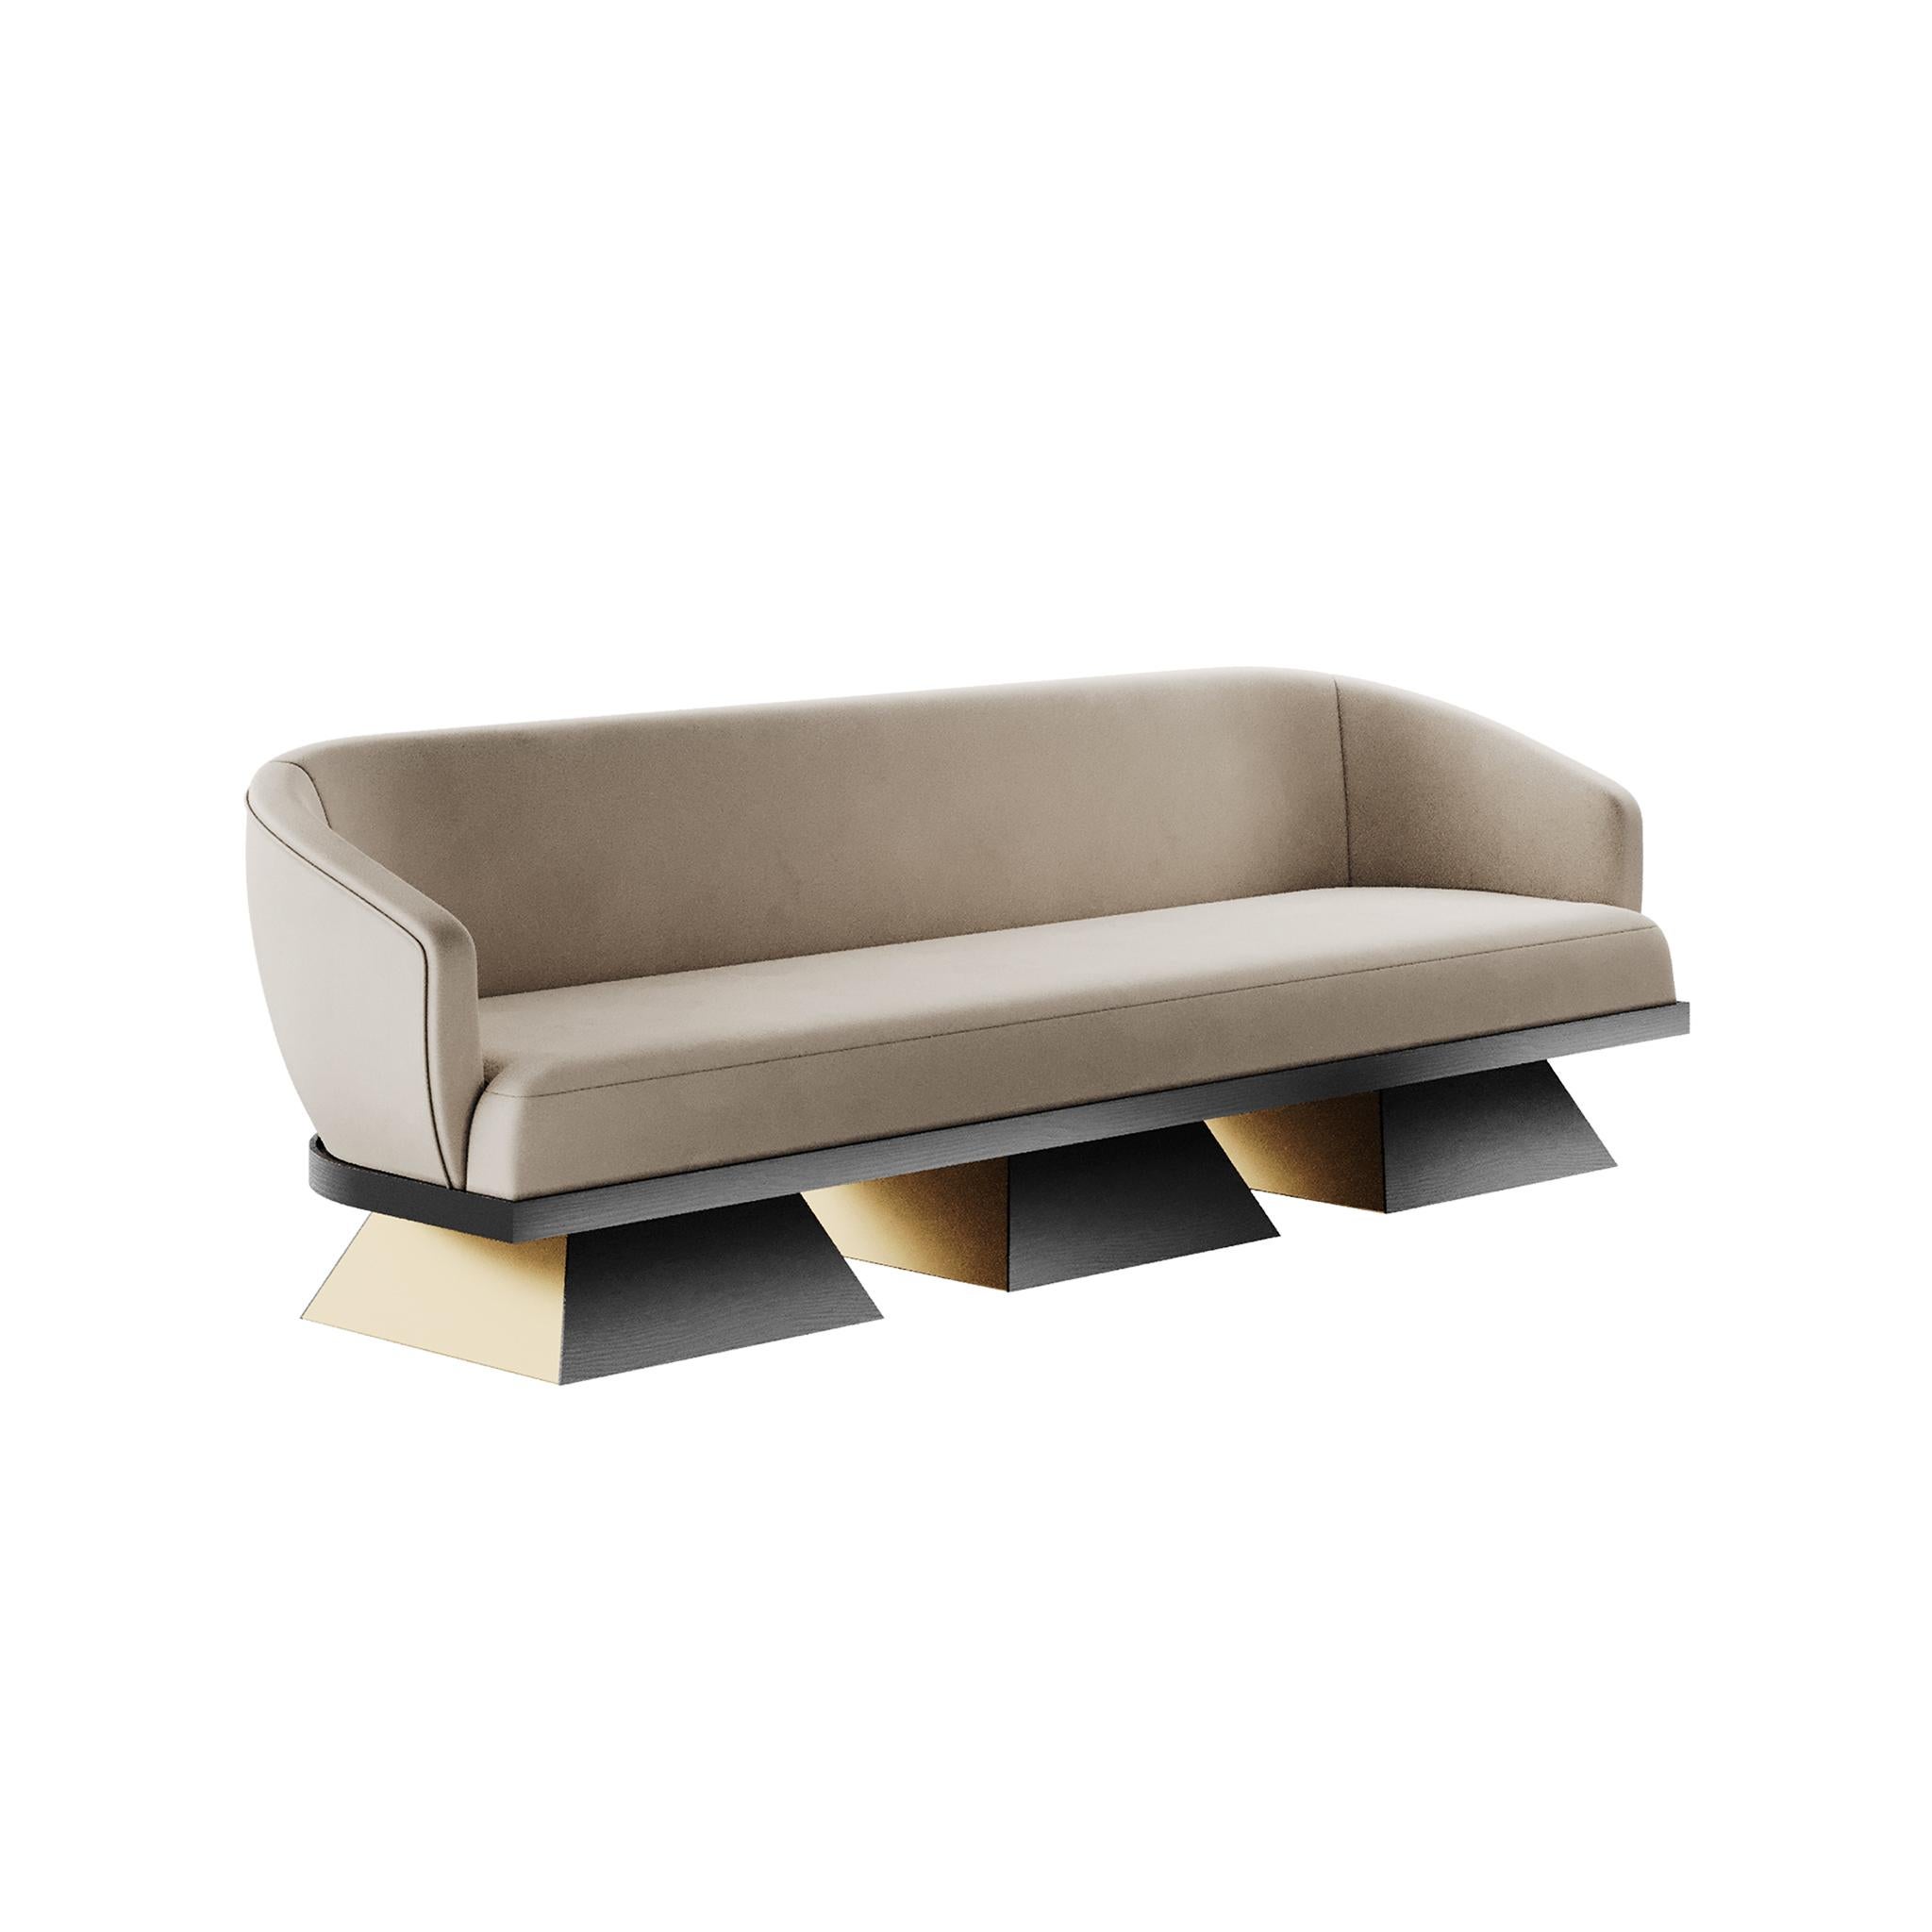 Moa Sofa is a luxury sofa for modern living room design projects. This stunning modern sofa represents the latest designs of sofas. Please contact us for further details and customization options.

Materials: Upholstered in Suede. Base in matte